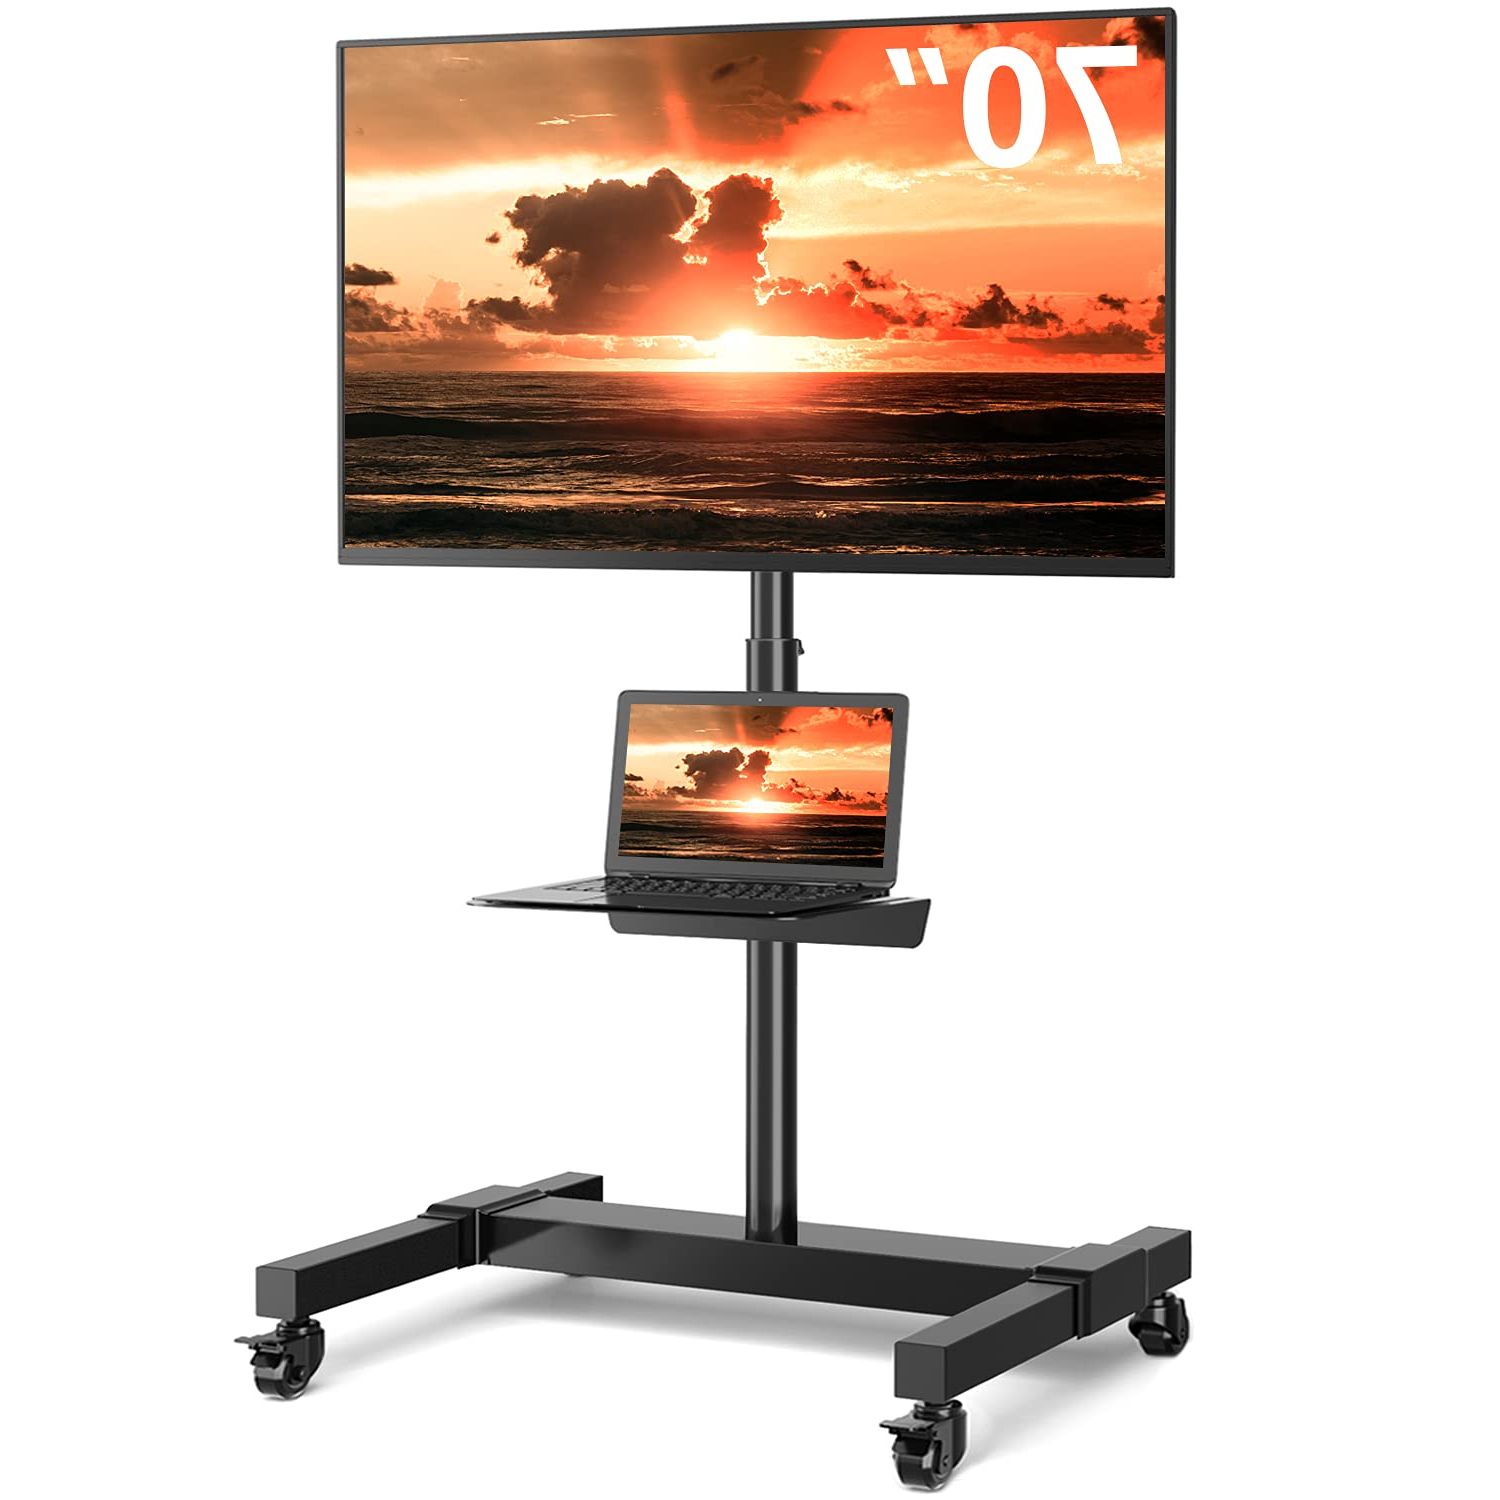 Mobile Tilt Rolling Tv Stands Pertaining To Popular 5rcom Large Rolling Tv Stand Portable Monitor Stand For 32 70 Inch Flat (View 13 of 15)